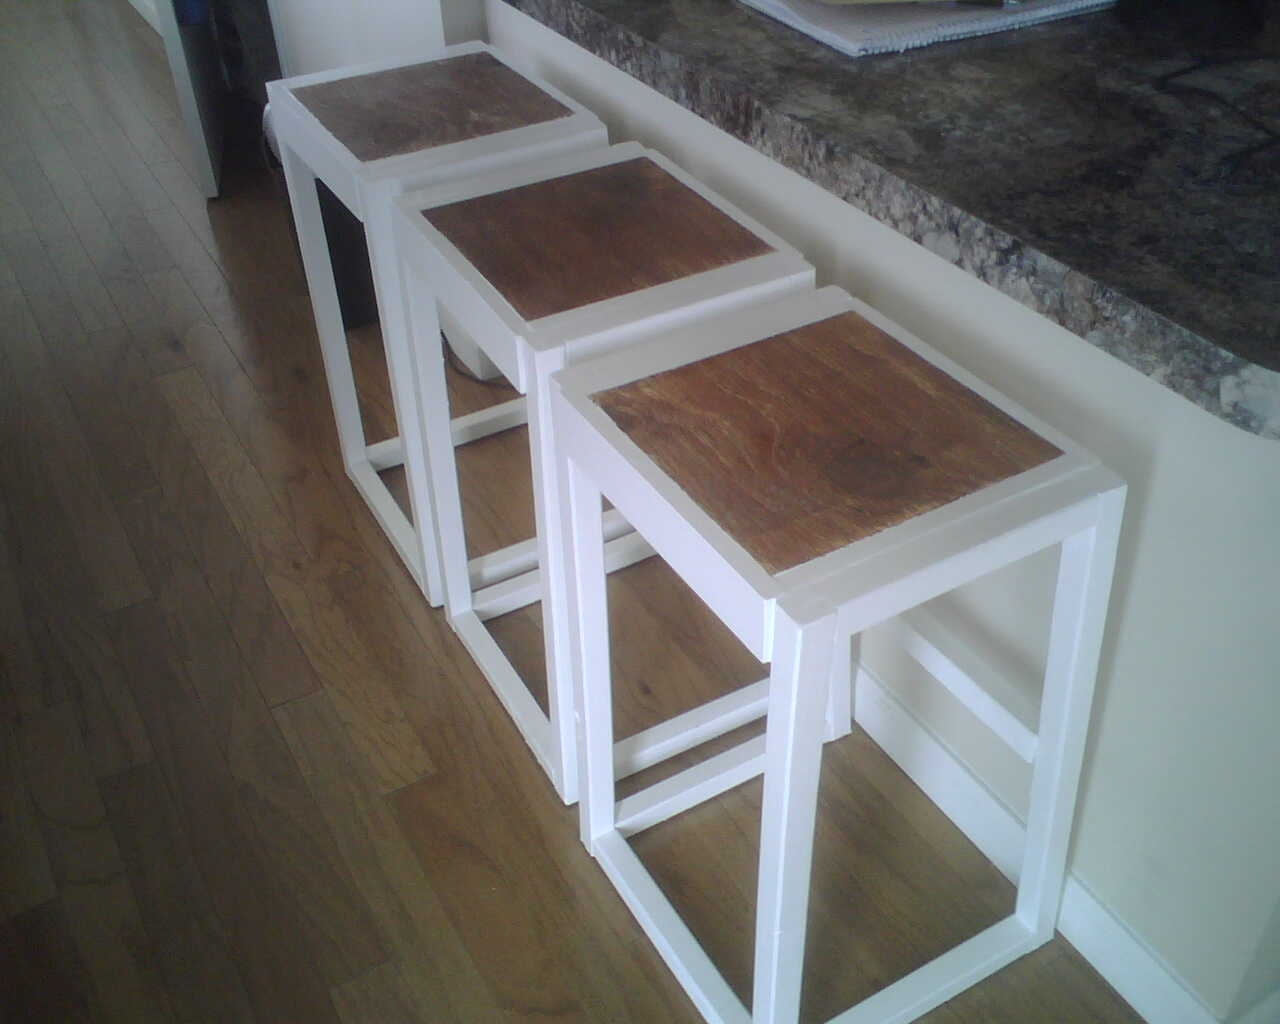 Wood Bar Stool Plans - Easy DIY Woodworking Projects Step by Step How 